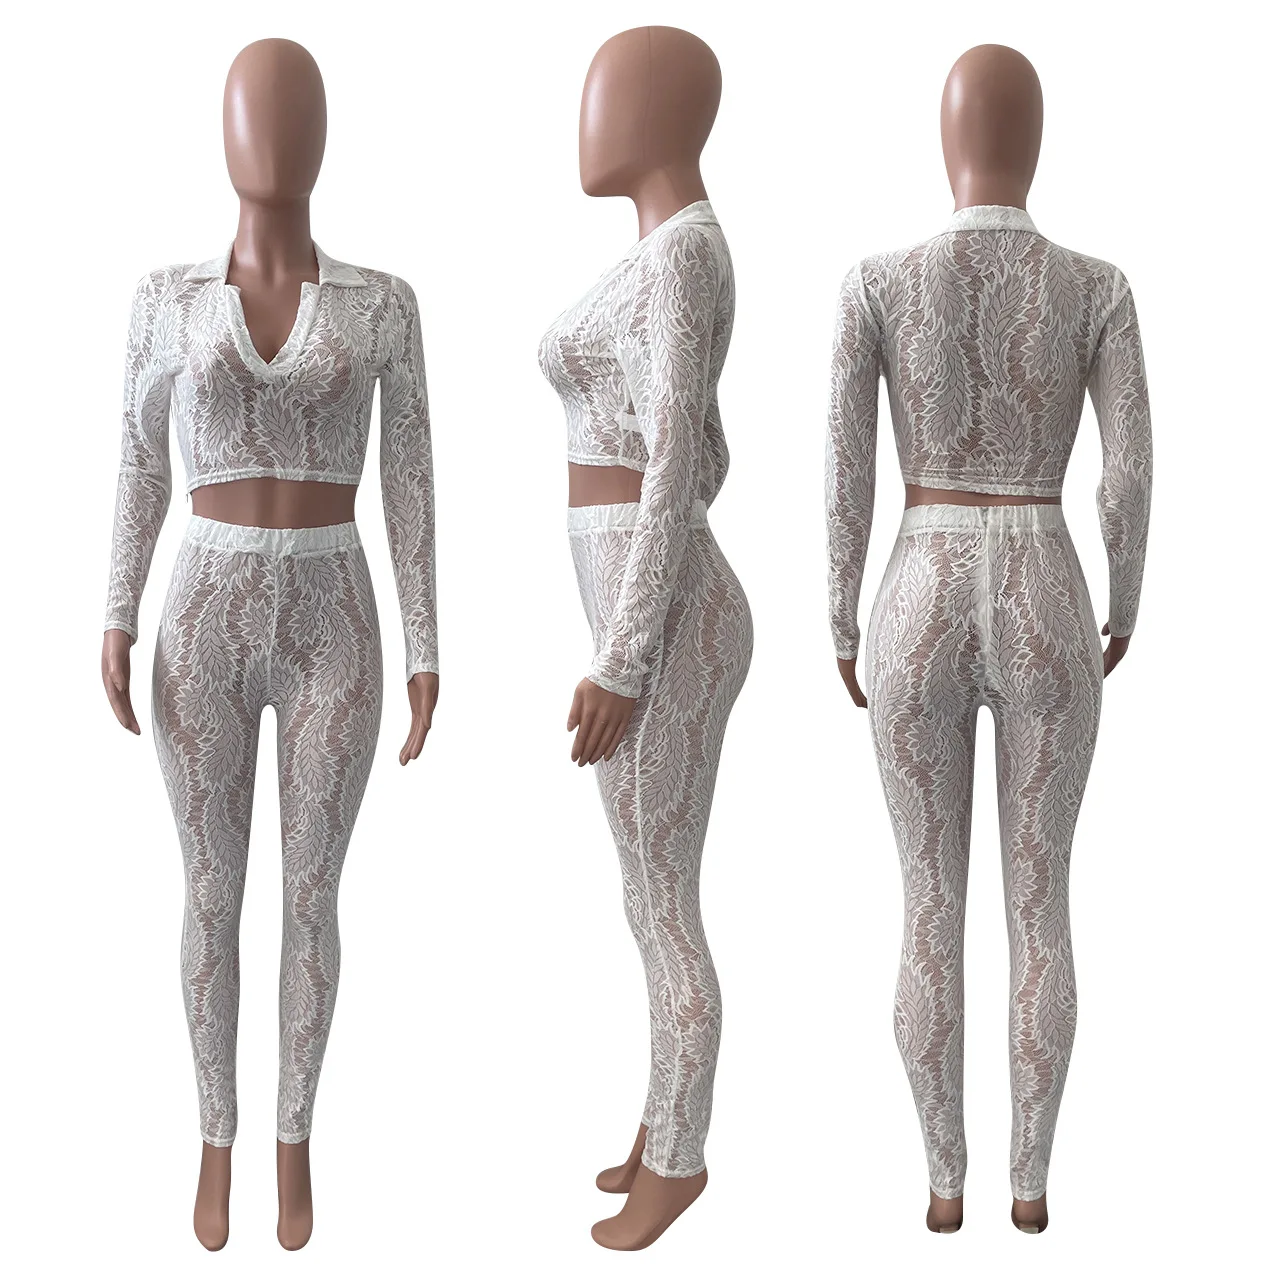 ANJAMANOR Lace Sexy Two Piece Set Long Sleeve Crop Top and Pants Black White See Through Bodycon Outfits Clubwear 2021 D27-DA32 track suit set